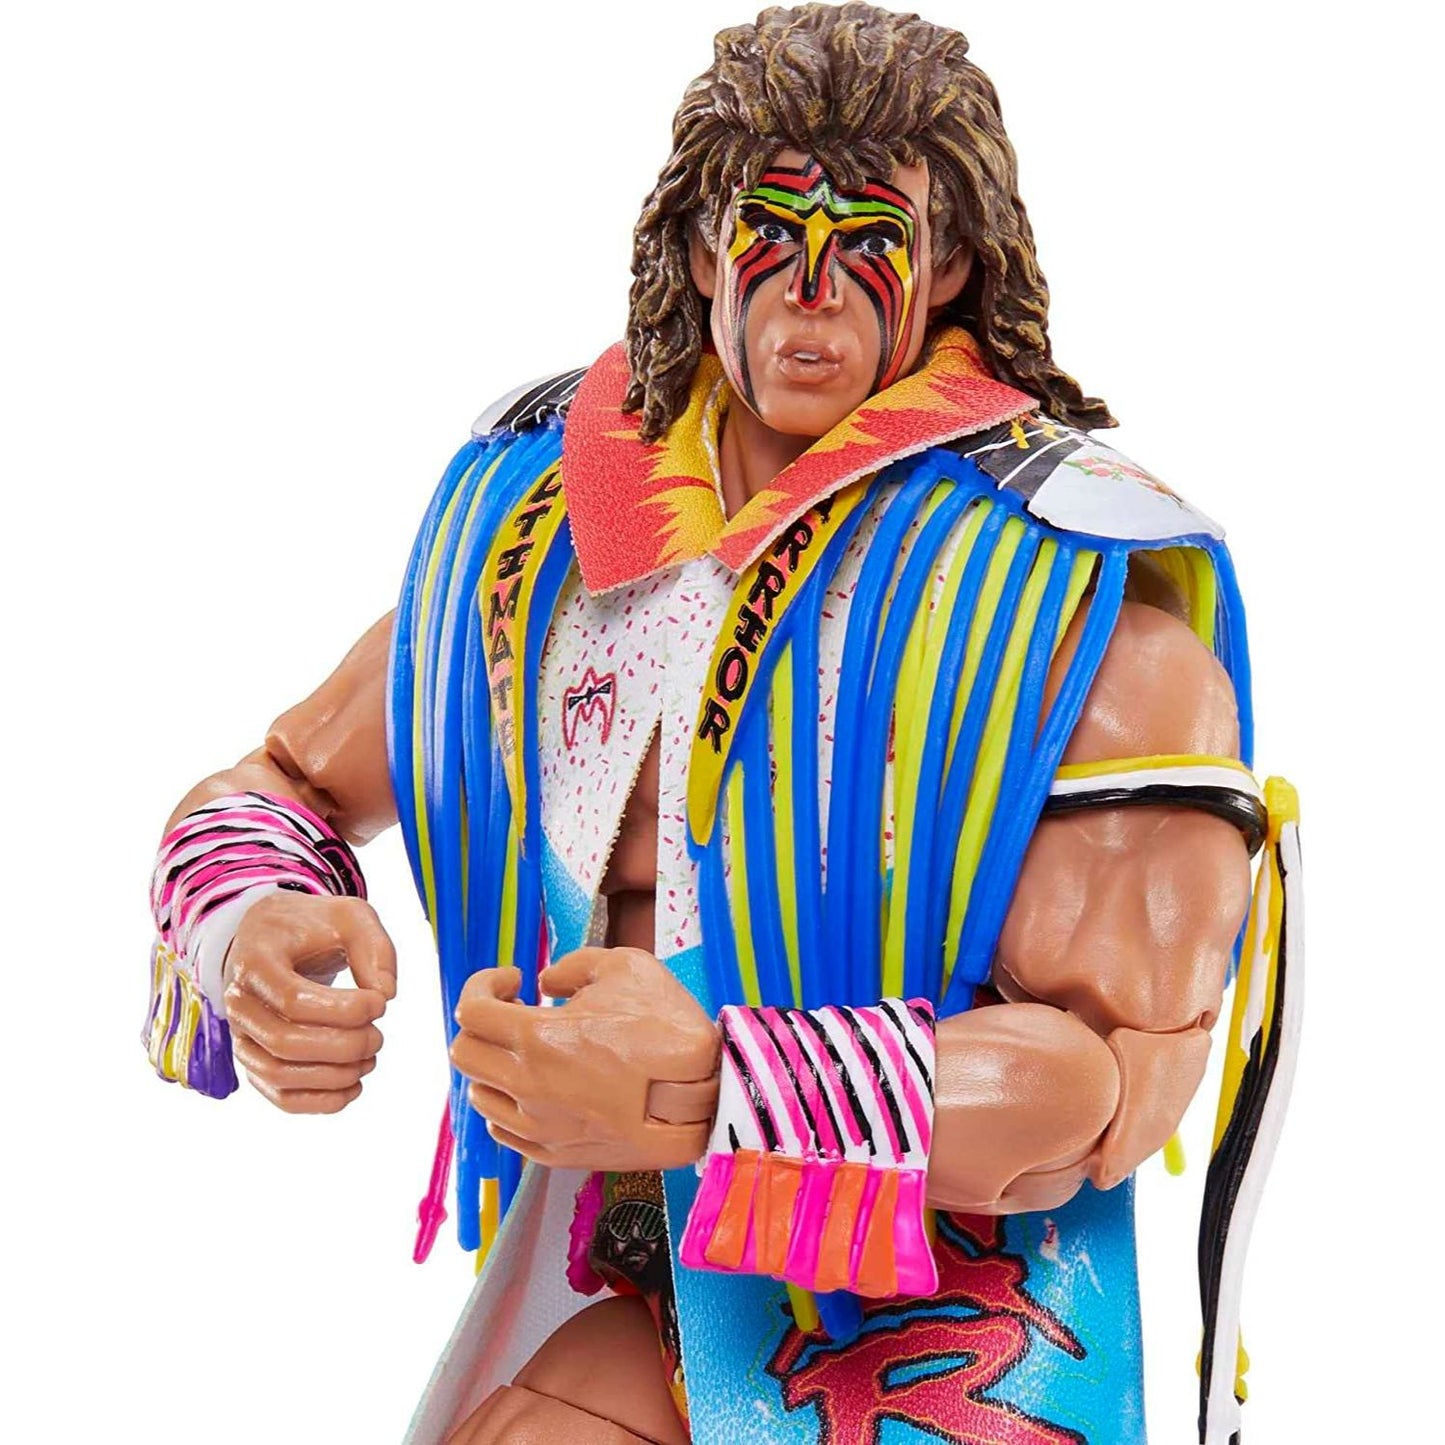 WWE Ultimate Warrior Ultimate Edition Action Figure Toy